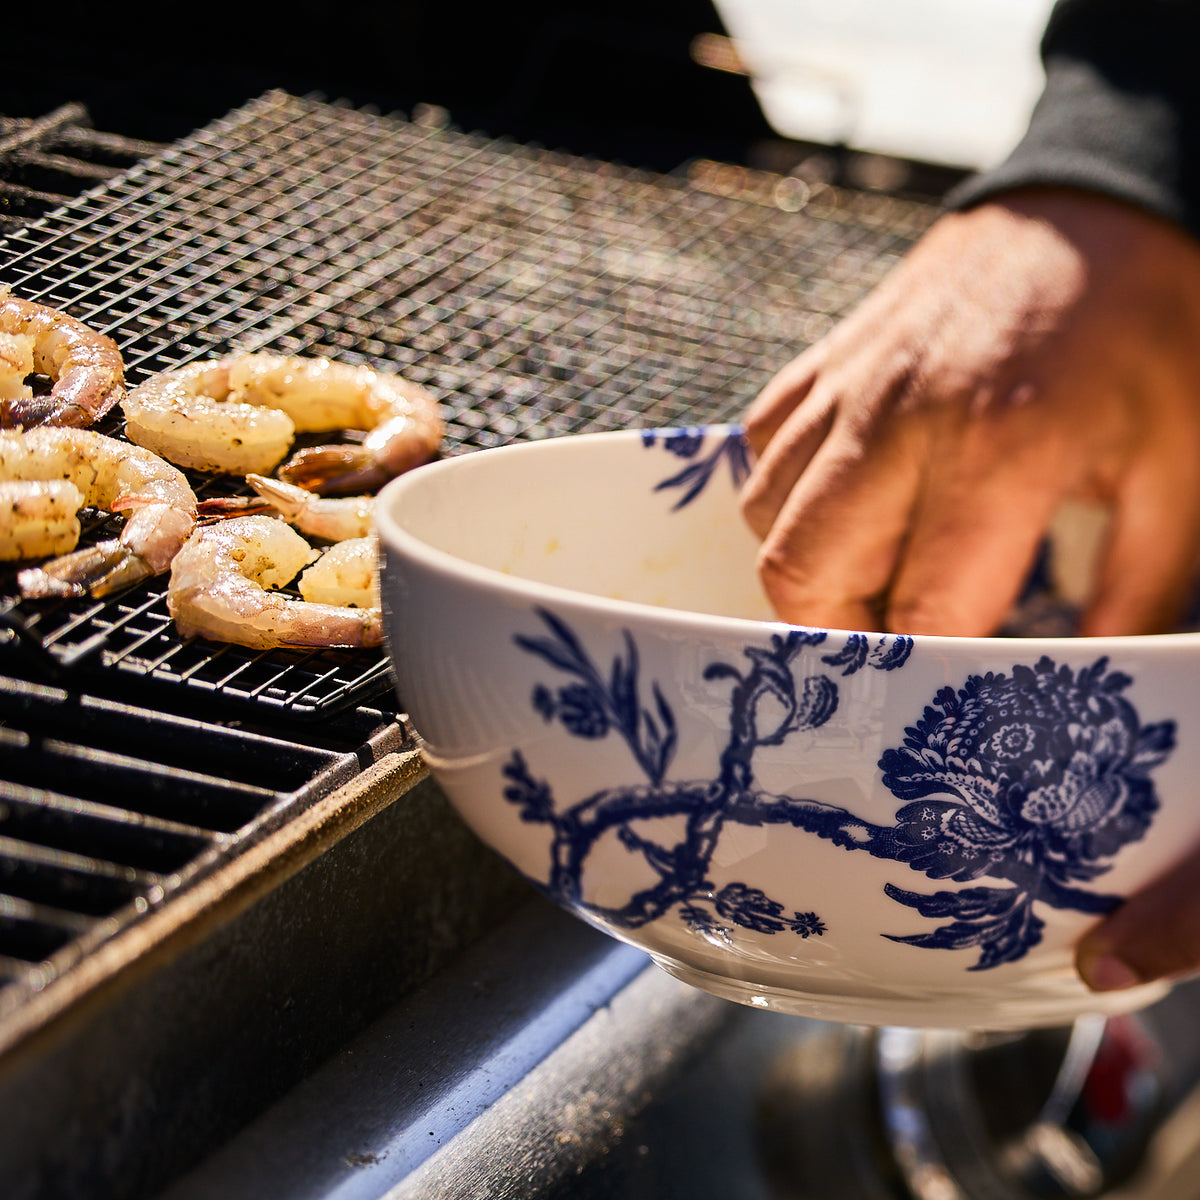 A person is placing seasoned shrimp on a grill using an Arcadia Vegetable Serving Bowl, reminiscent of the elegance found in Caskata Artisanal Home&#39;s premium porcelain dinnerware.